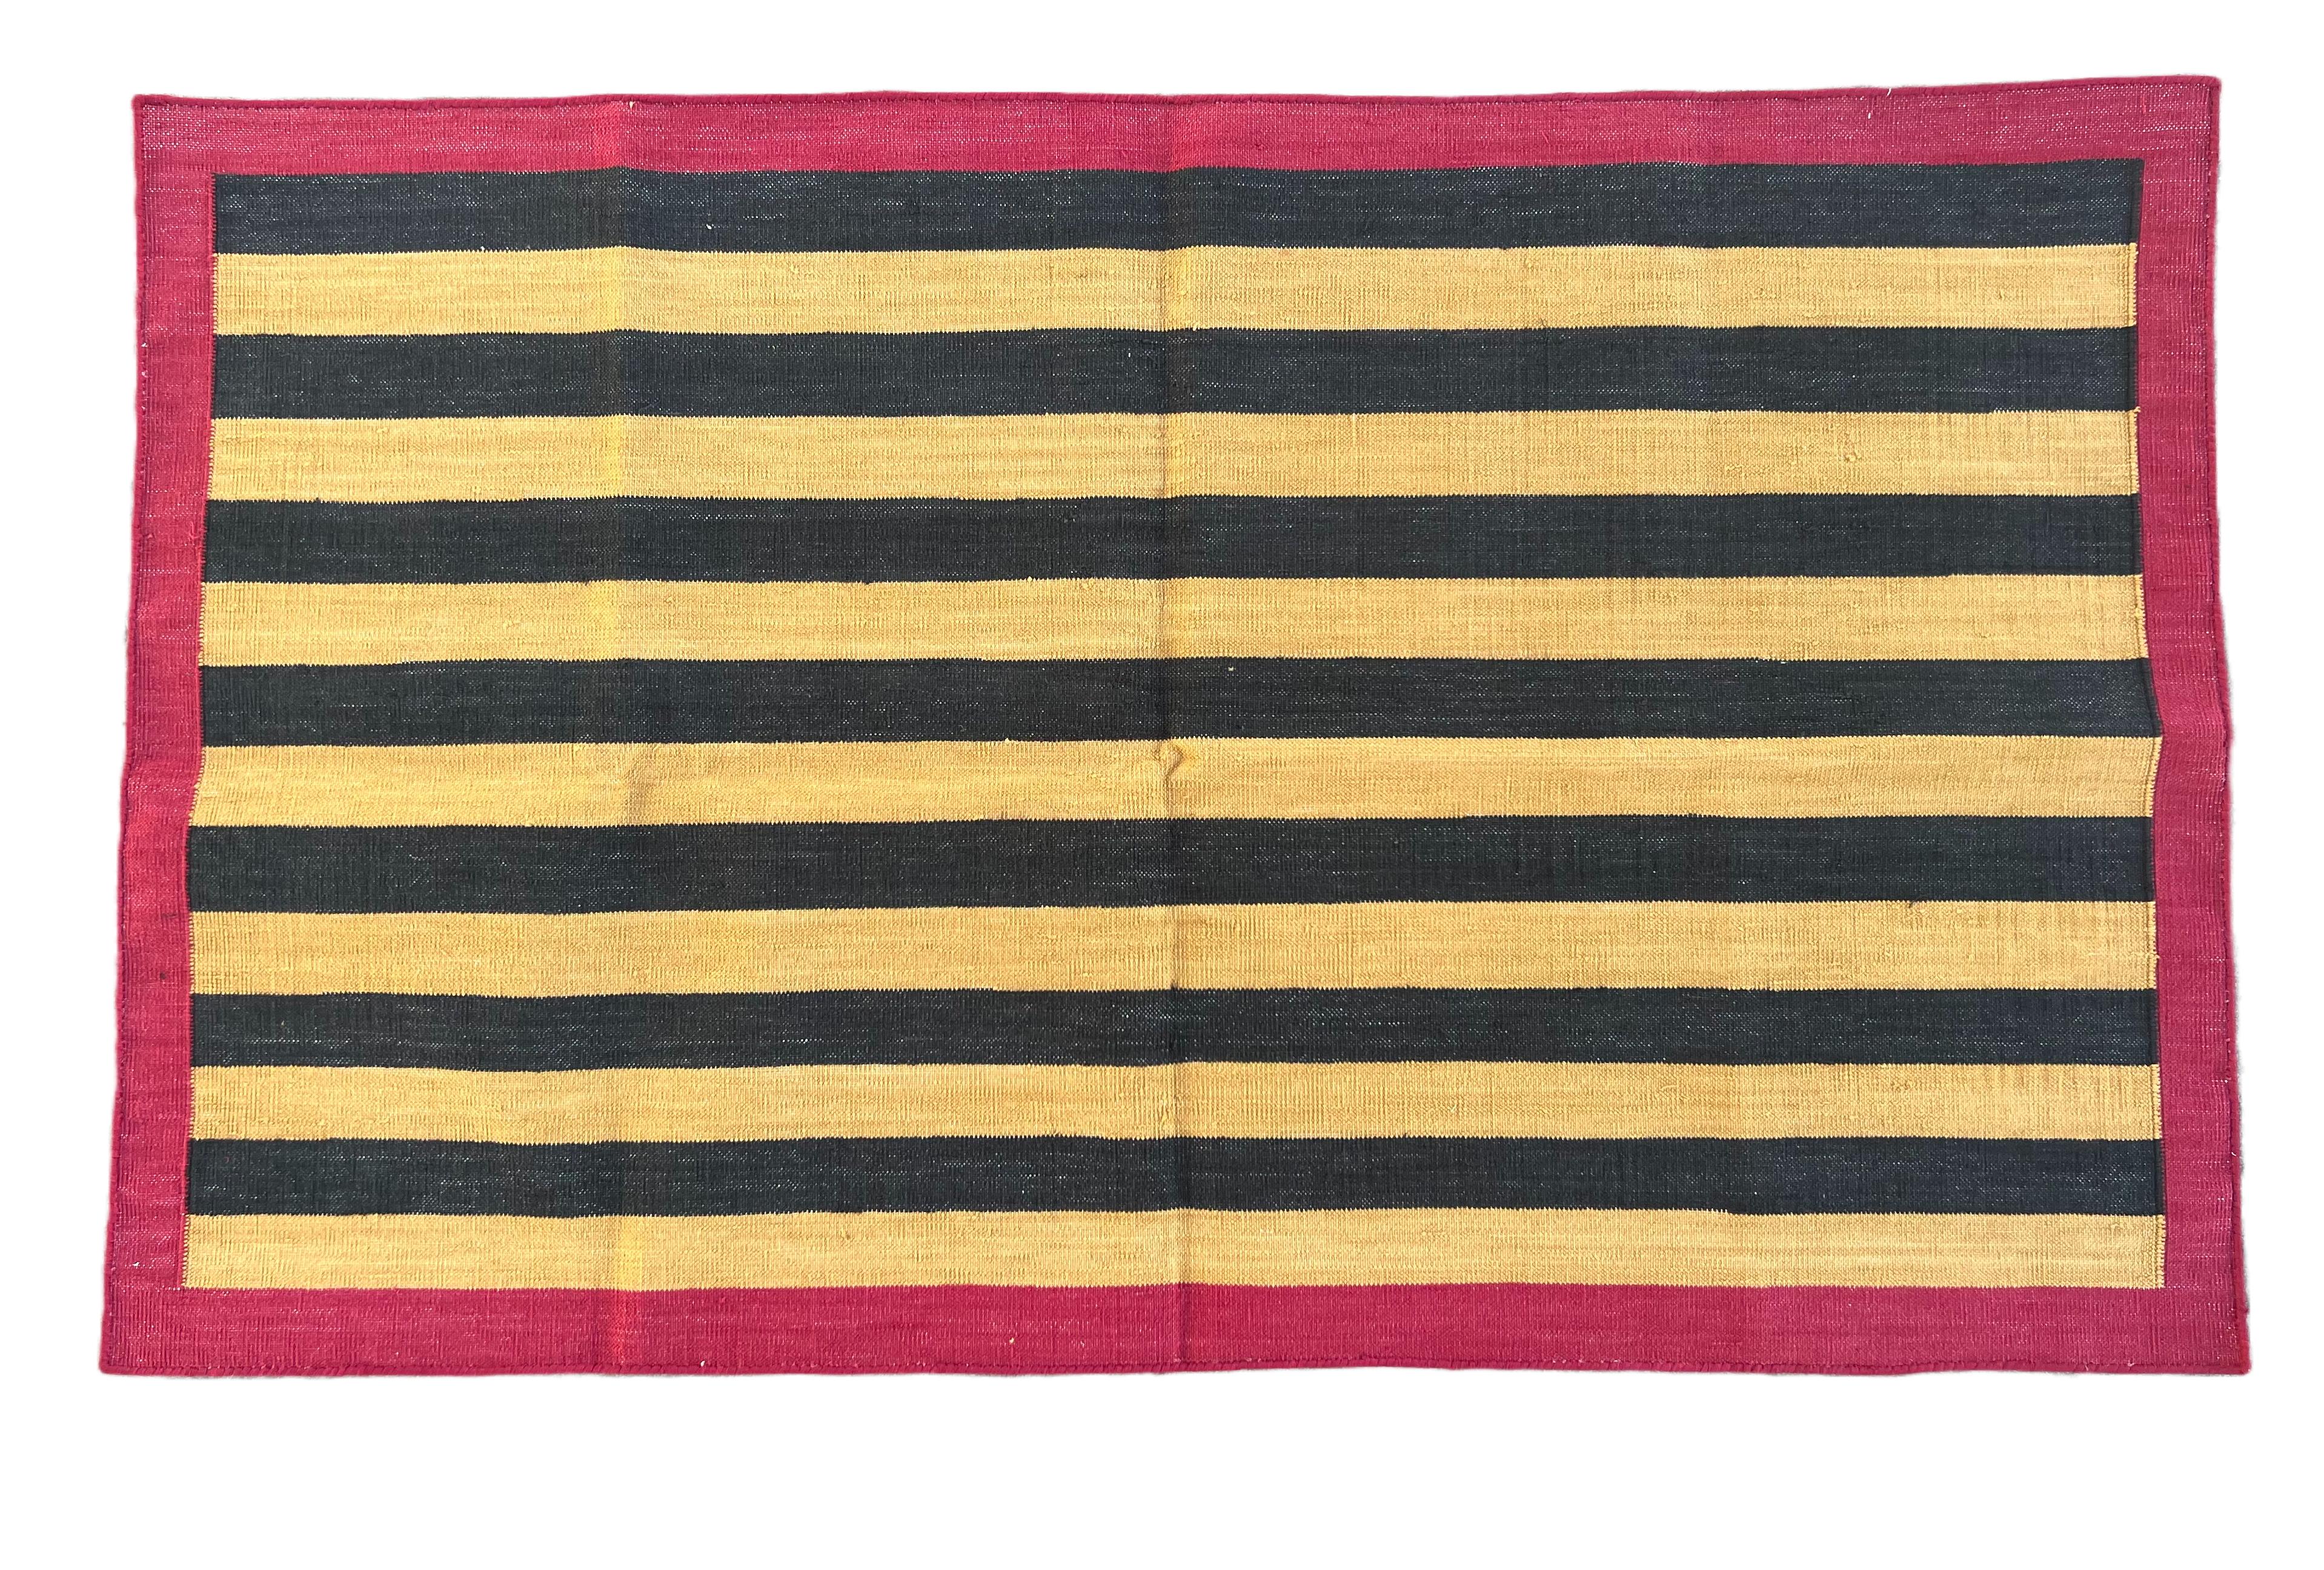 Cotton Vegetable Dyed Yellow, Black And Red Striped Indian Dhurrie Rug-2.5'x4' 
These special flat-weave dhurries are hand-woven with 15 ply 100% cotton yarn. Due to the special manufacturing techniques used to create our rugs, the size and color of